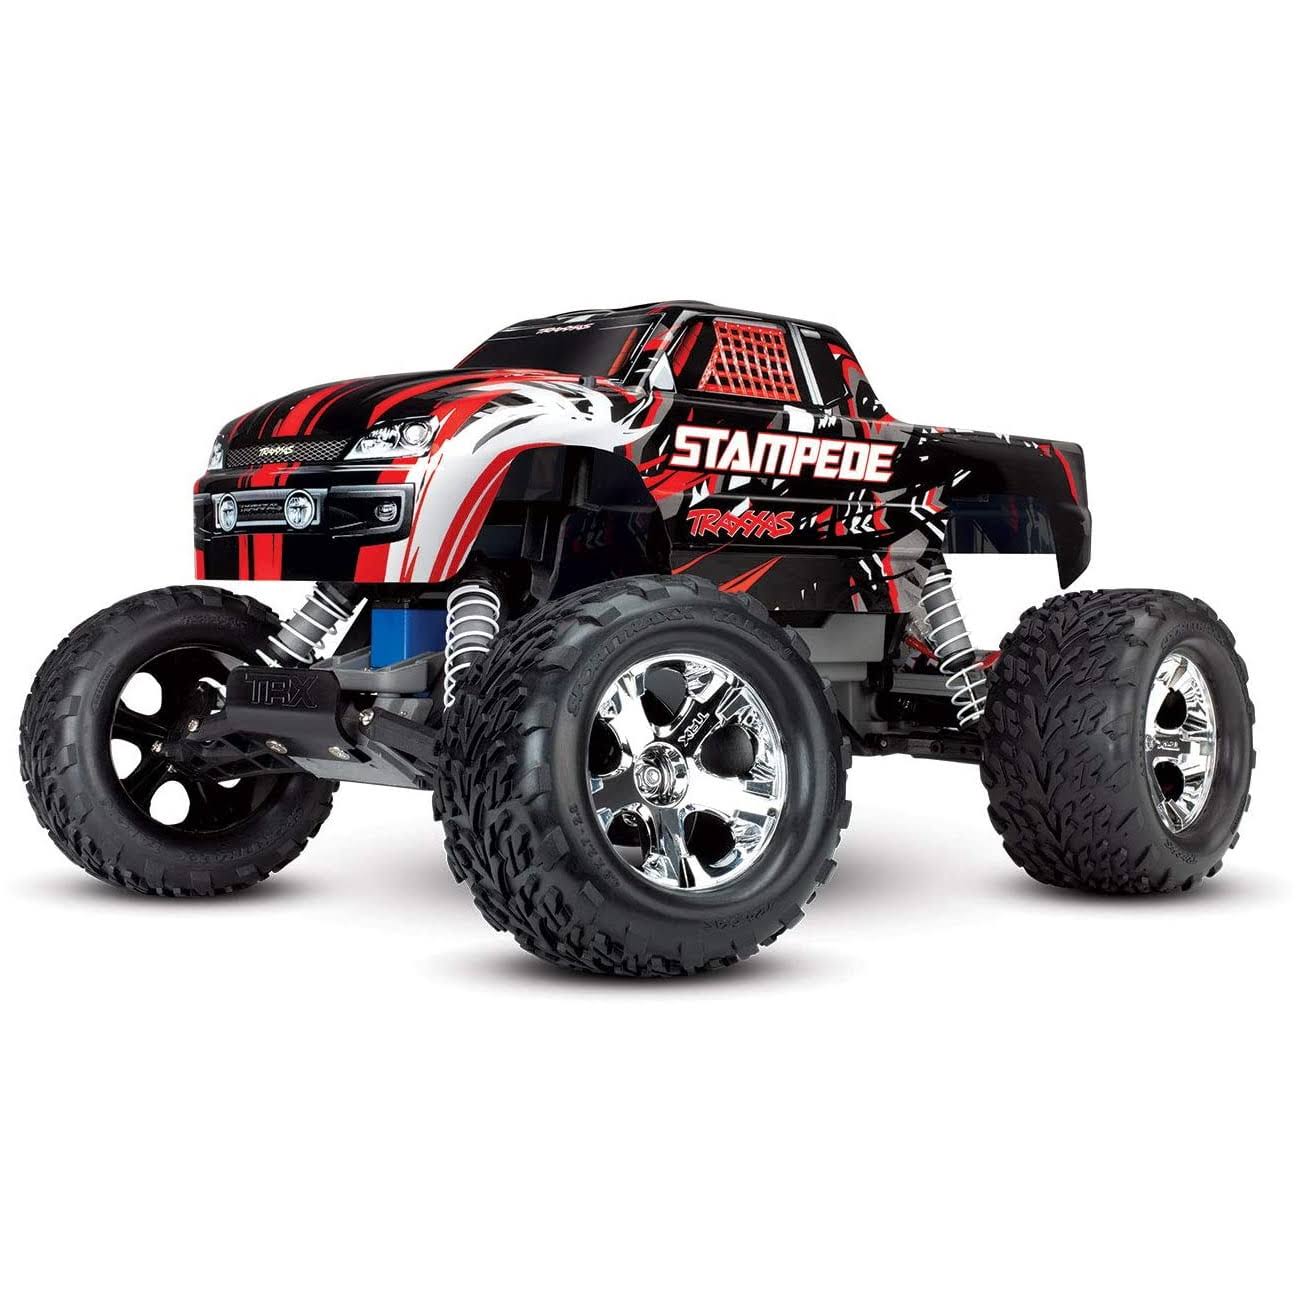 Traxxas Stampede 1/10 2WD Monster Truck with TQ 2.4GHz Radio, Red, 1:1